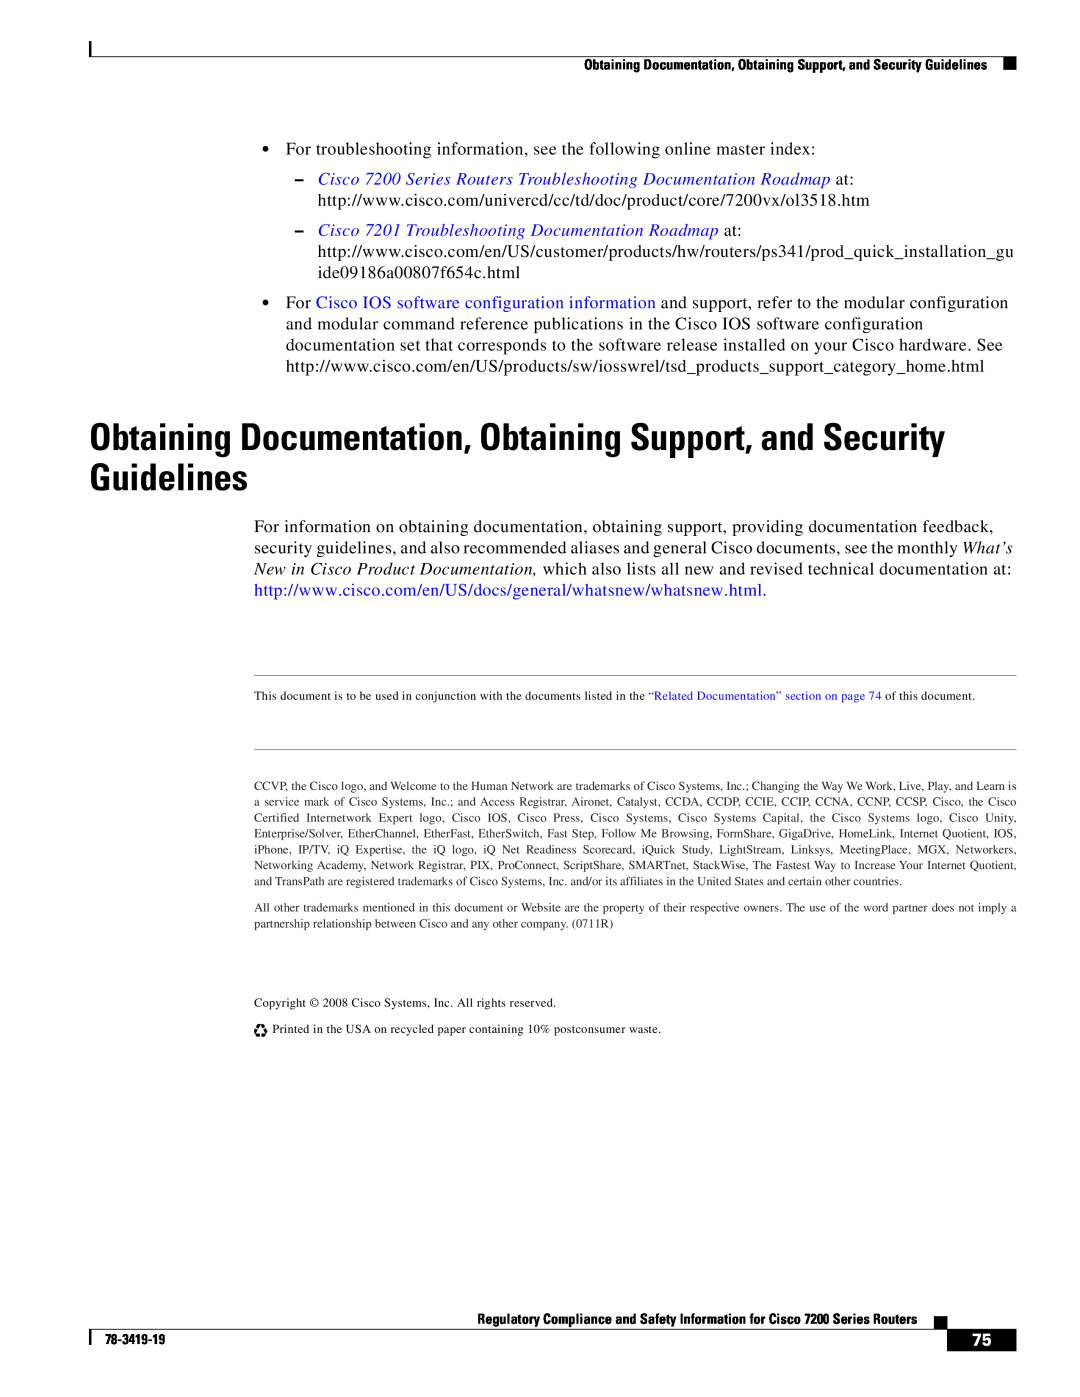 Cisco Systems 7202, 7206 VXR, 7200 Series Obtaining Documentation, Obtaining Support, and Security Guidelines, 78-3419-19 